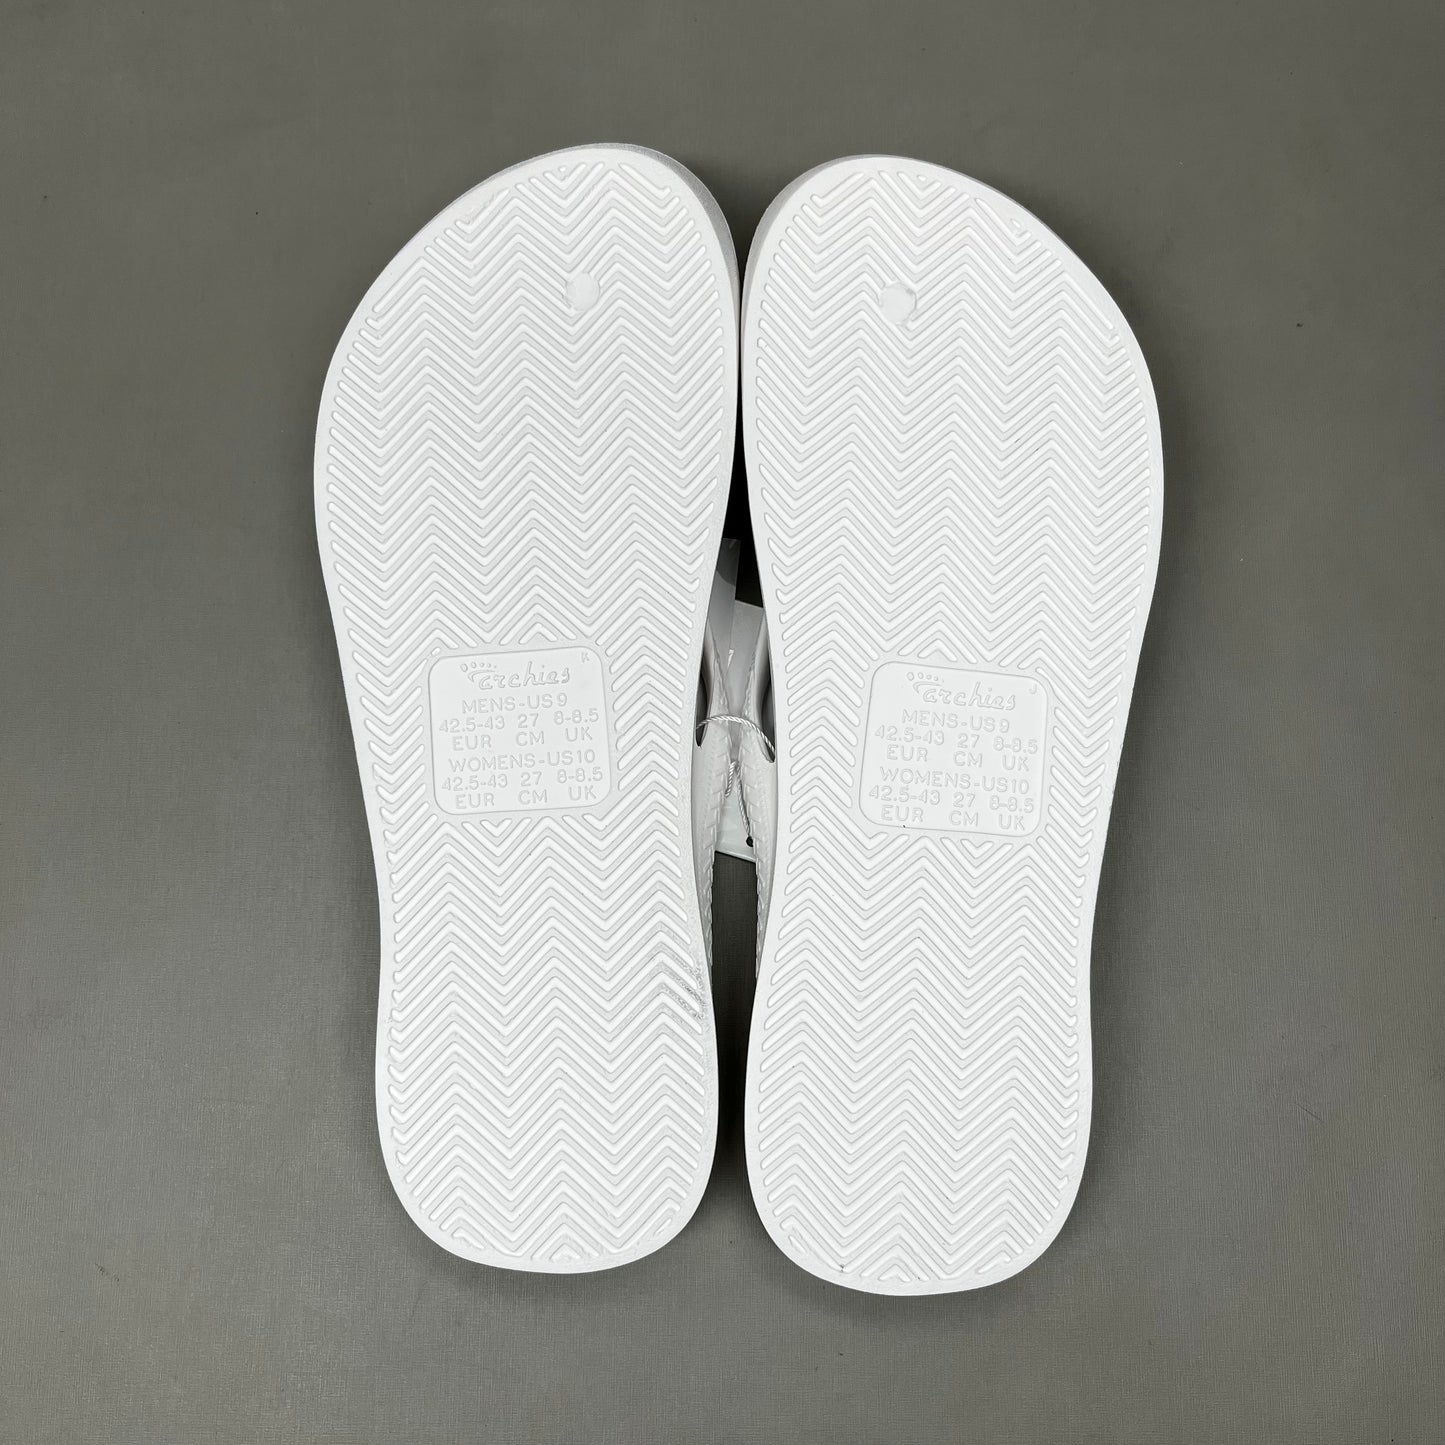 ARCHIES Arch Support Thongs HIGH SUPPORT Flip Flops Wmn's Sz 5 Men's Sz 4 White (New)